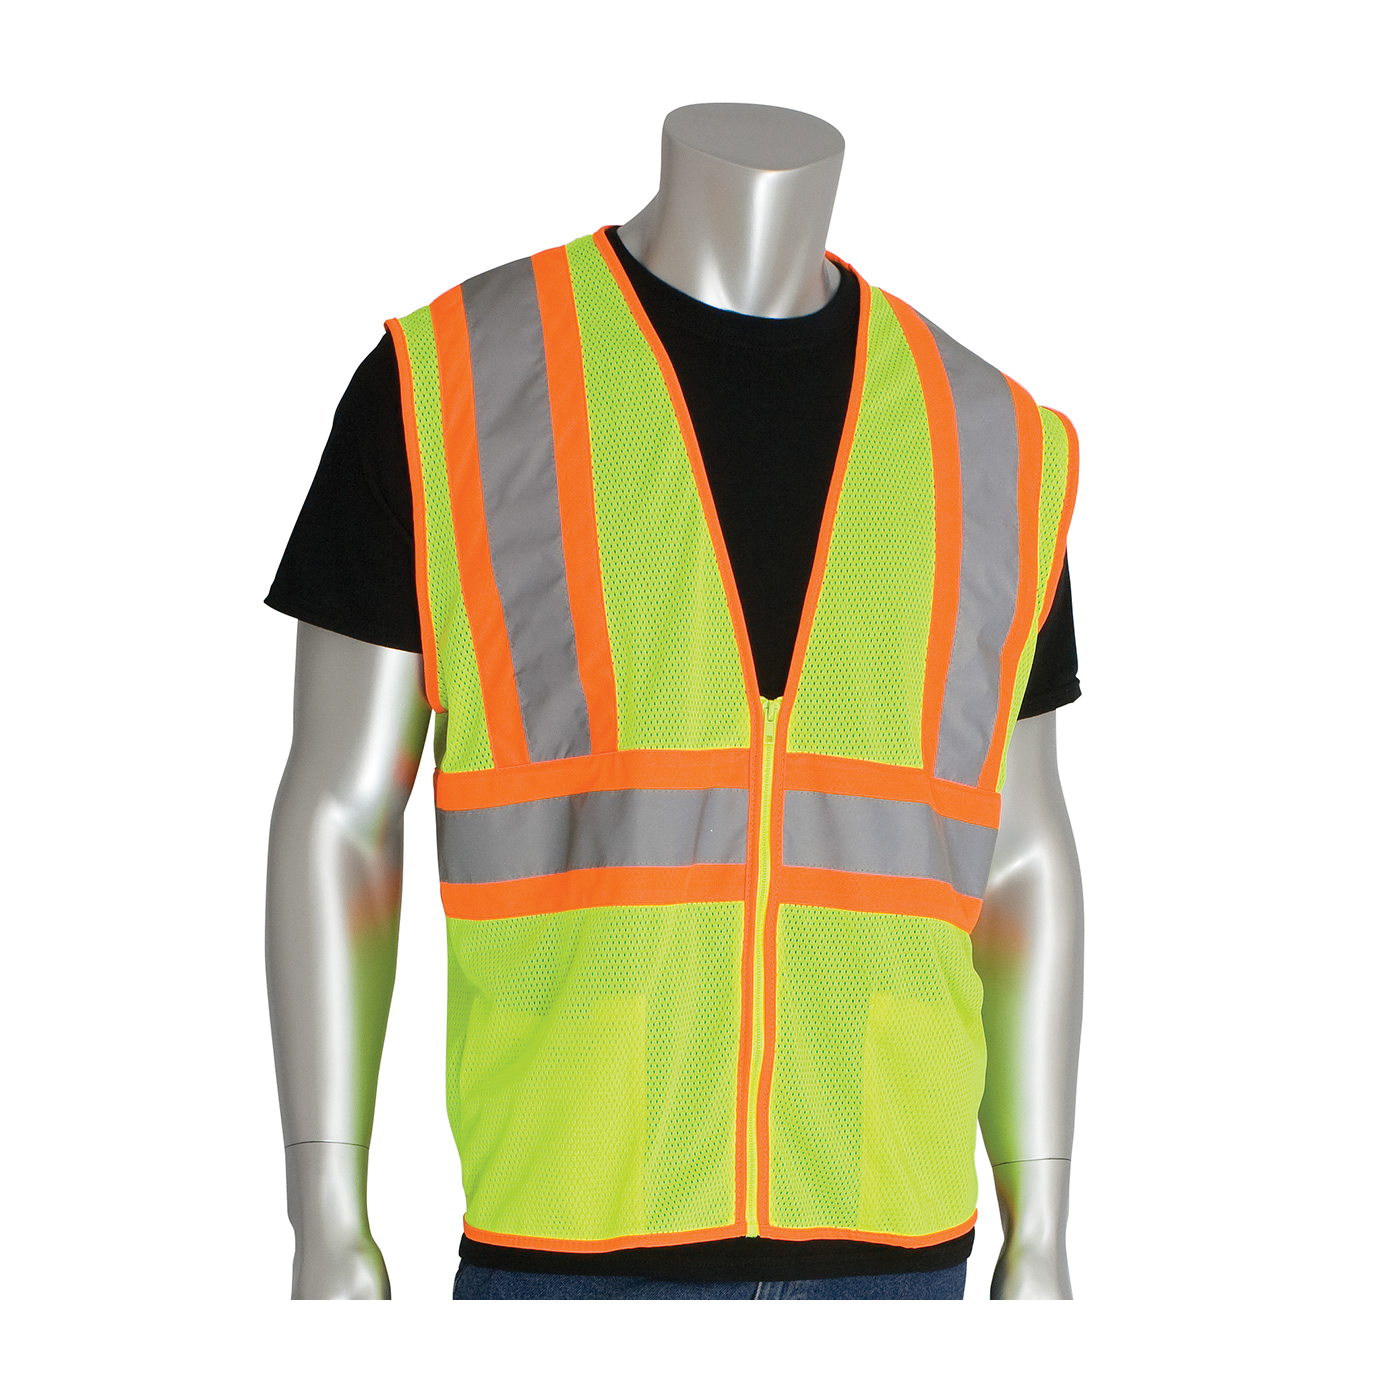 PIP® 302-MVLY-3X 2-Tone Safety Vest, 3XL, Hi-Viz Lime Yellow, Polyester Mesh, Zipper Closure, 2 Pockets, ANSI Class: Class 2, Specifications Met: ANSI 107 Type R